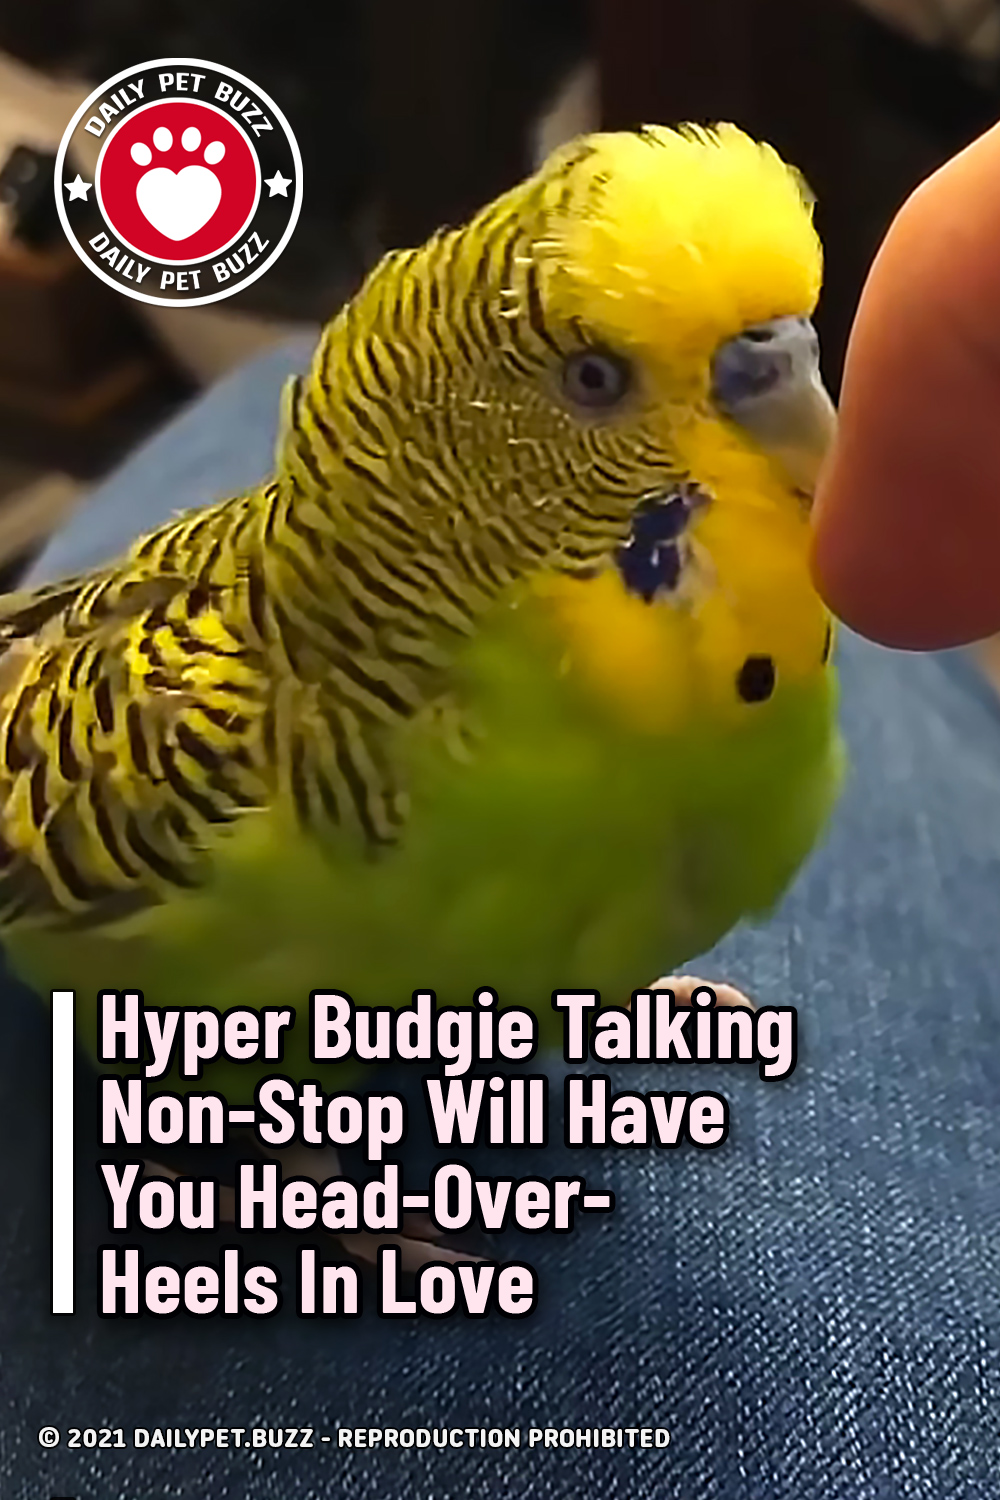 Hyper Budgie Talking Non-Stop Will Have You Head-Over-Heels In Love